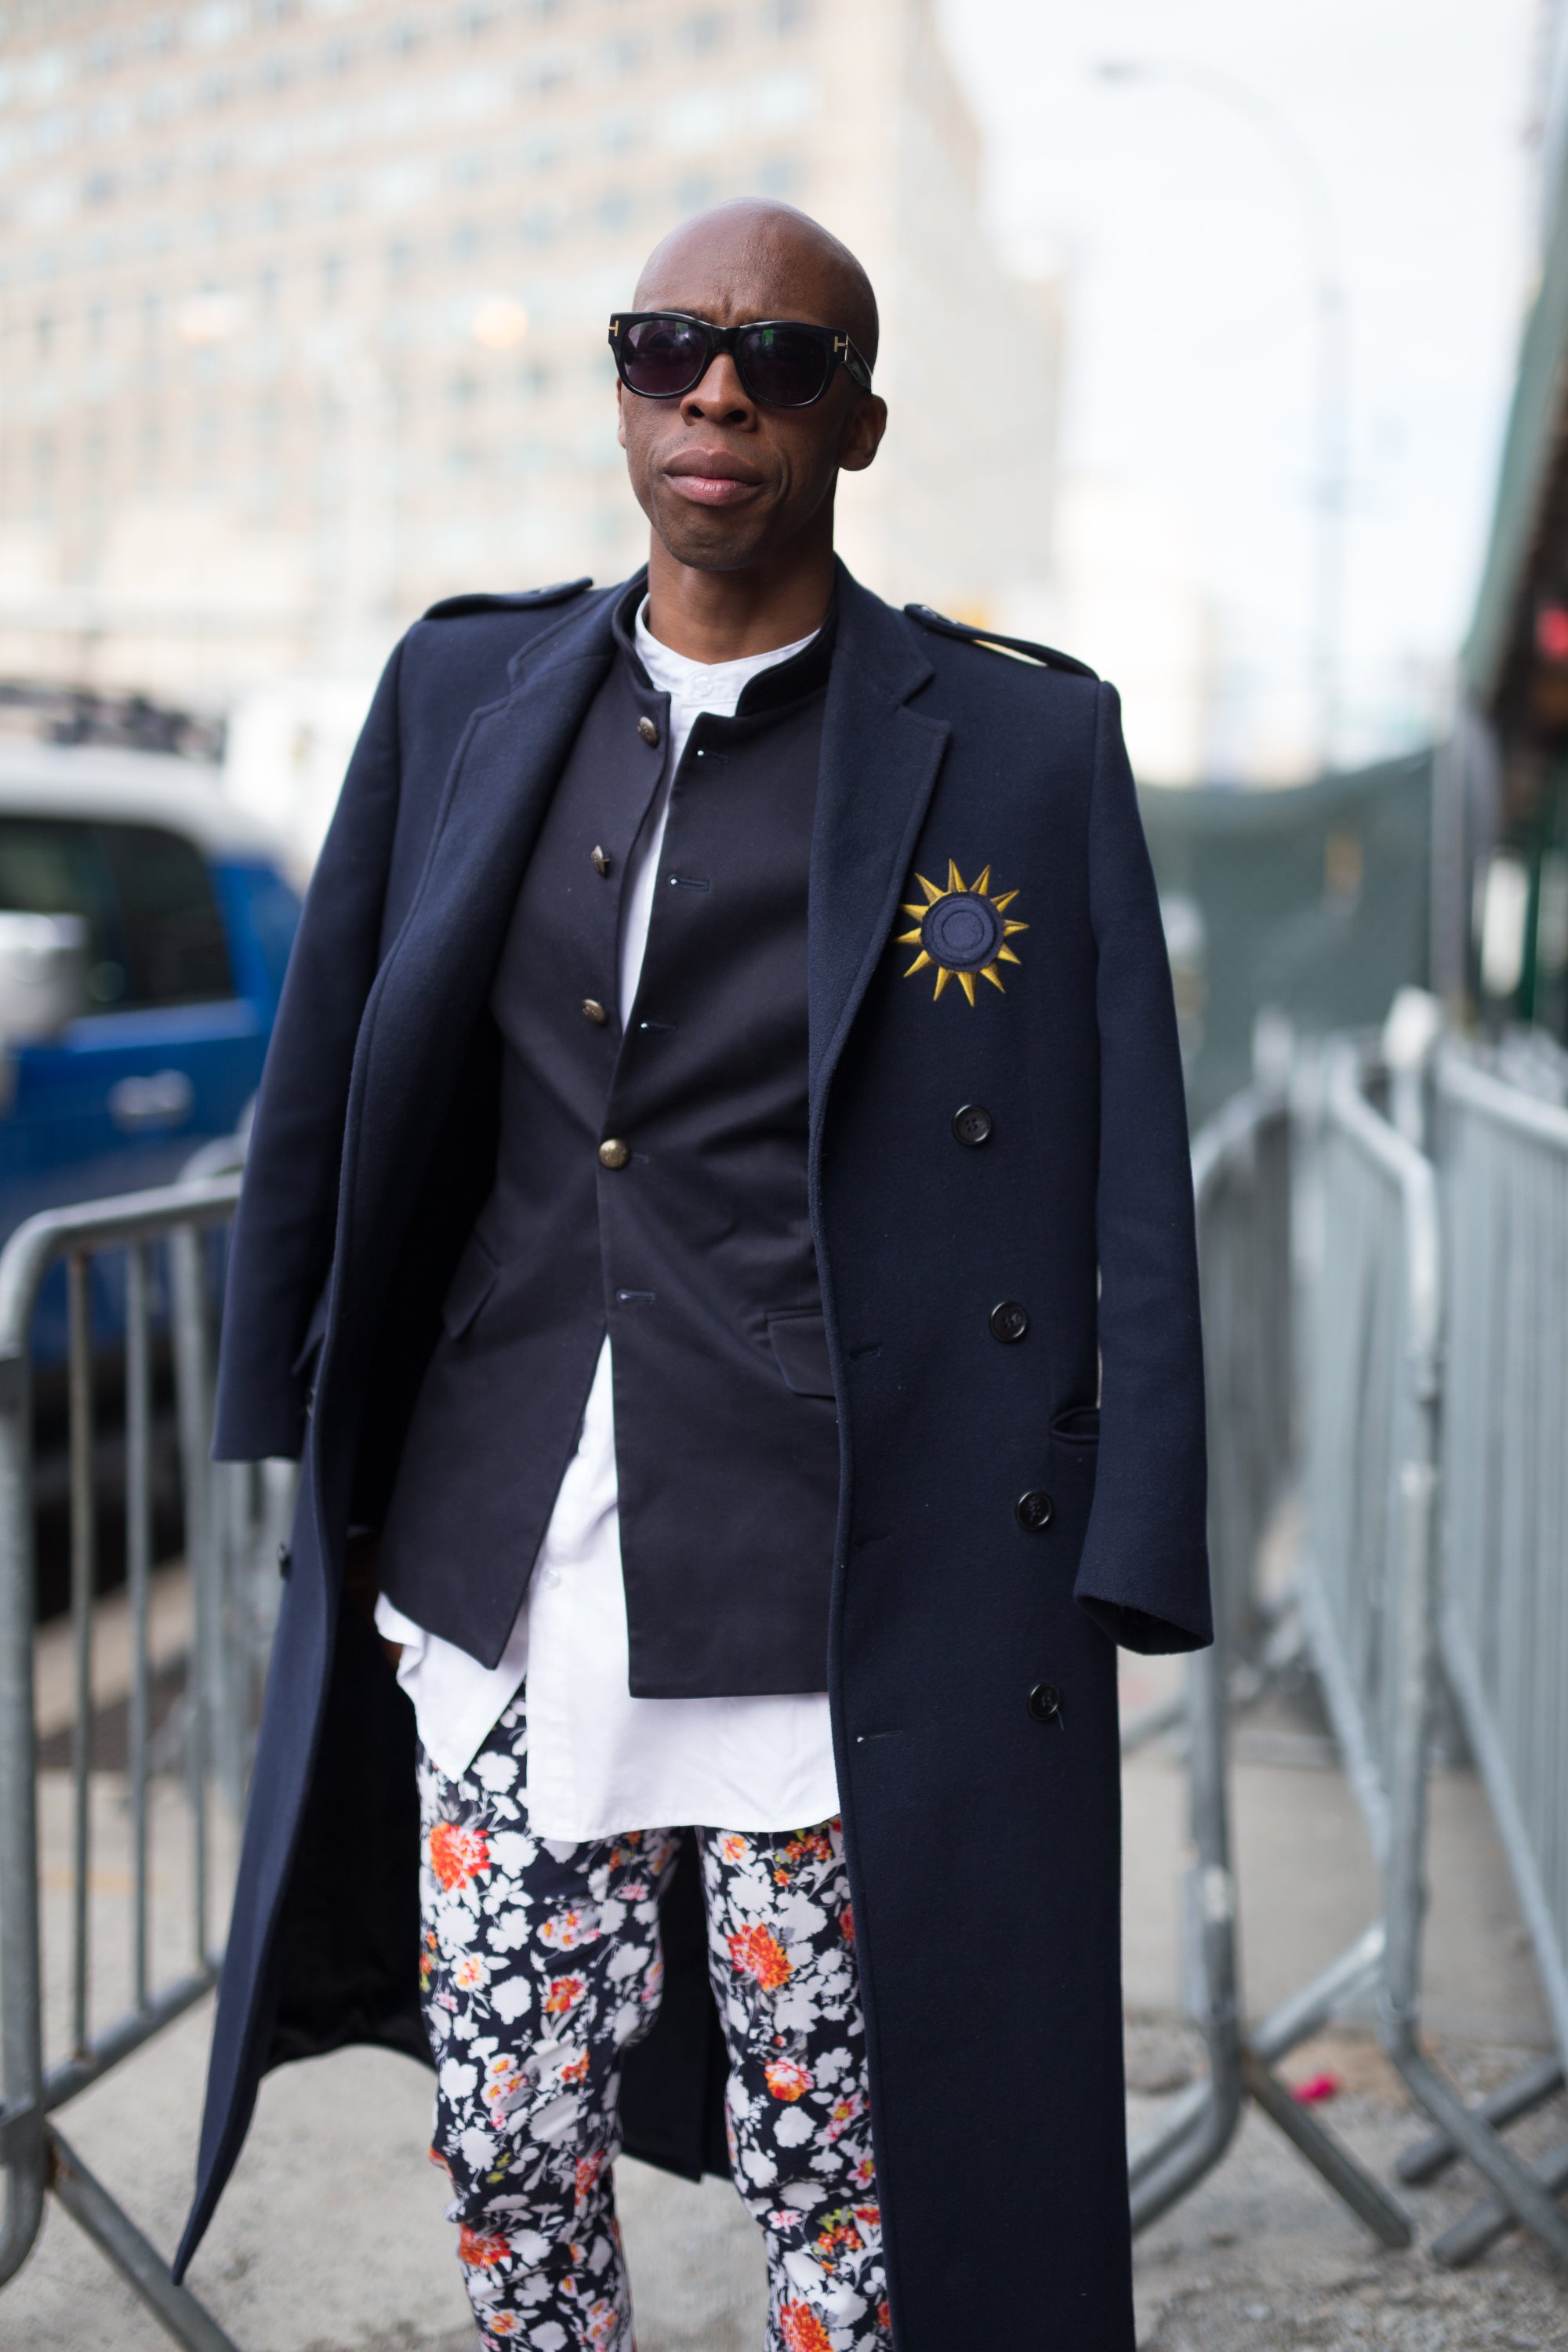 All The Fashionable Men Who Caught Our Eyes This Fashion Month | Essence